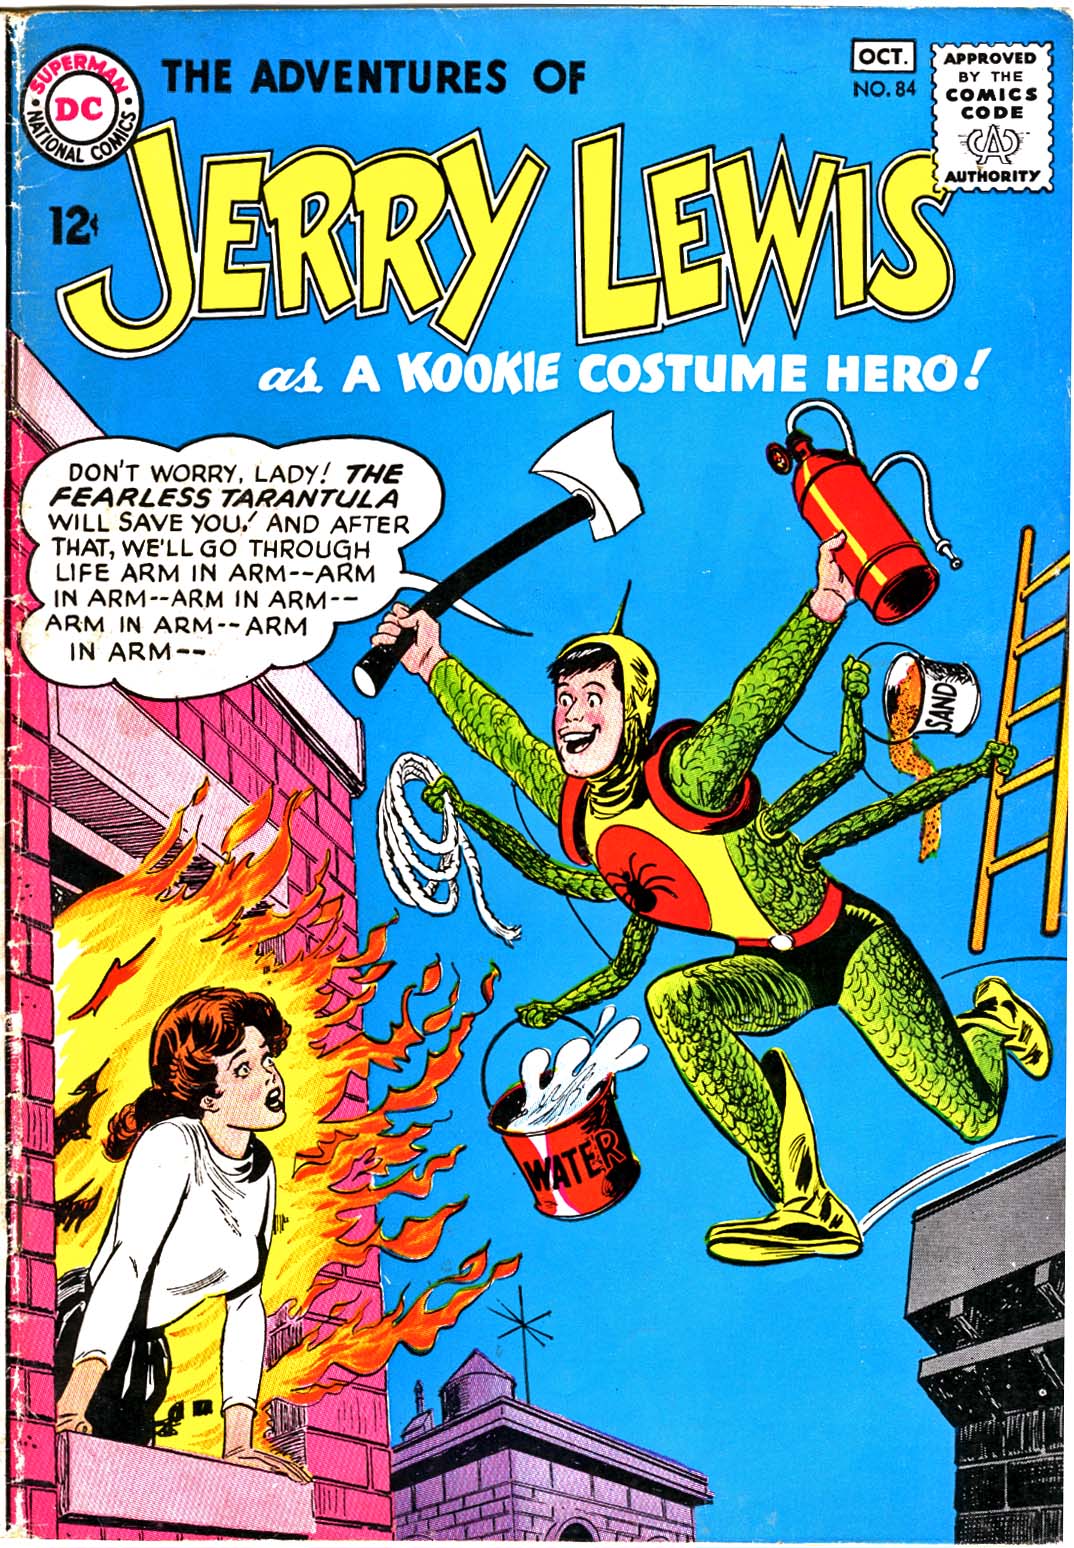 Read online The Adventures of Jerry Lewis comic -  Issue #84 - 1